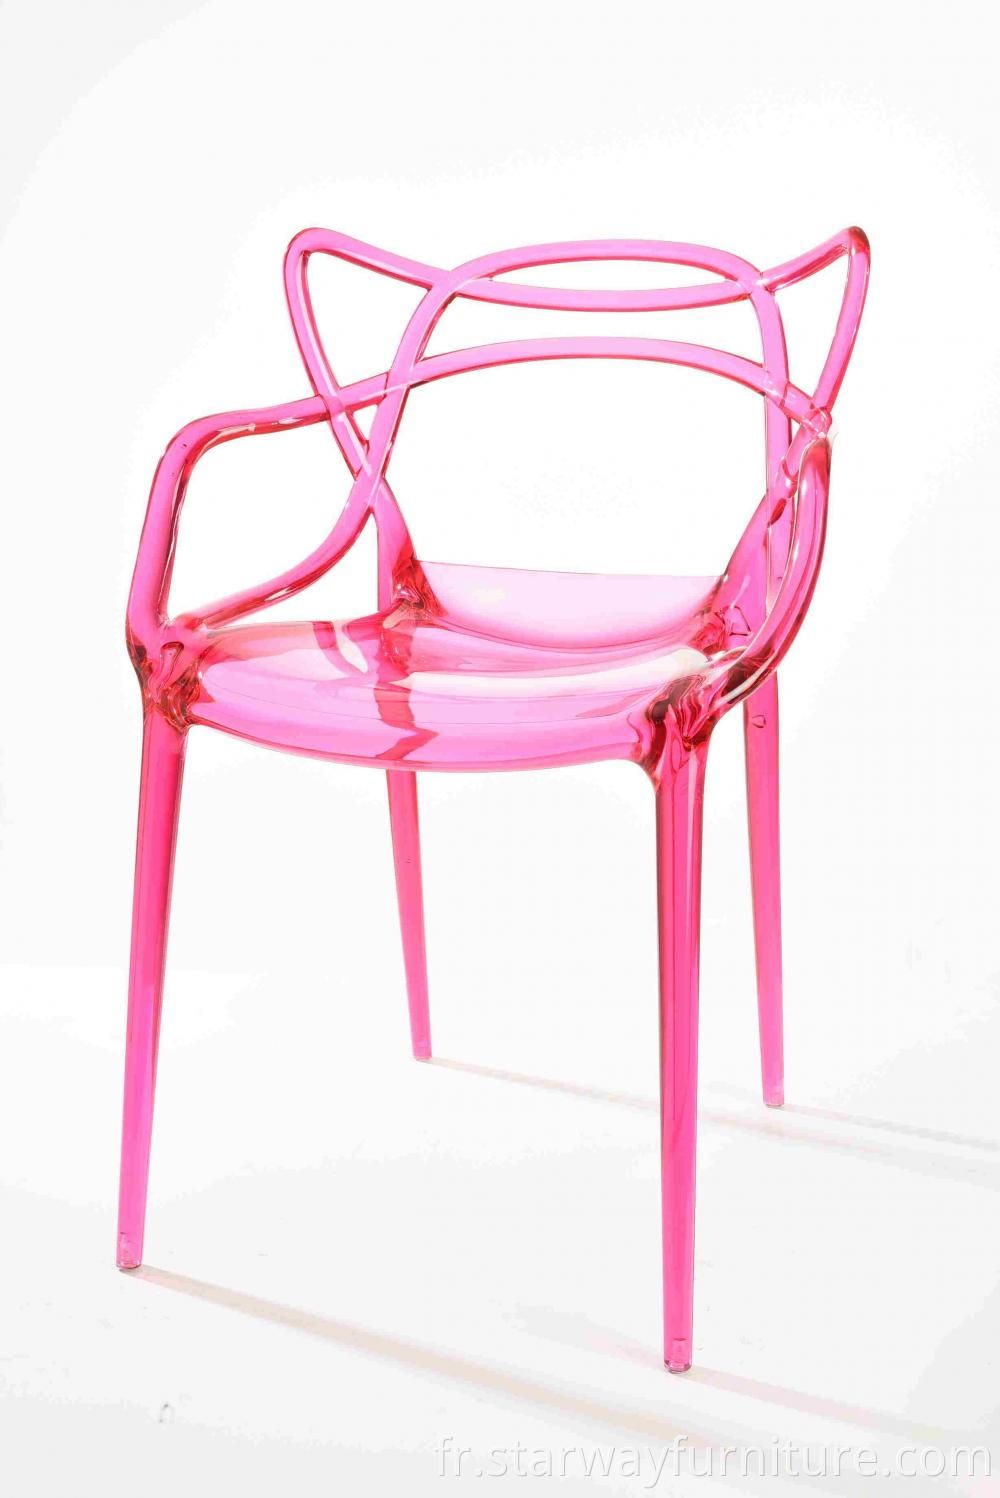 Stacking Plastic Chair